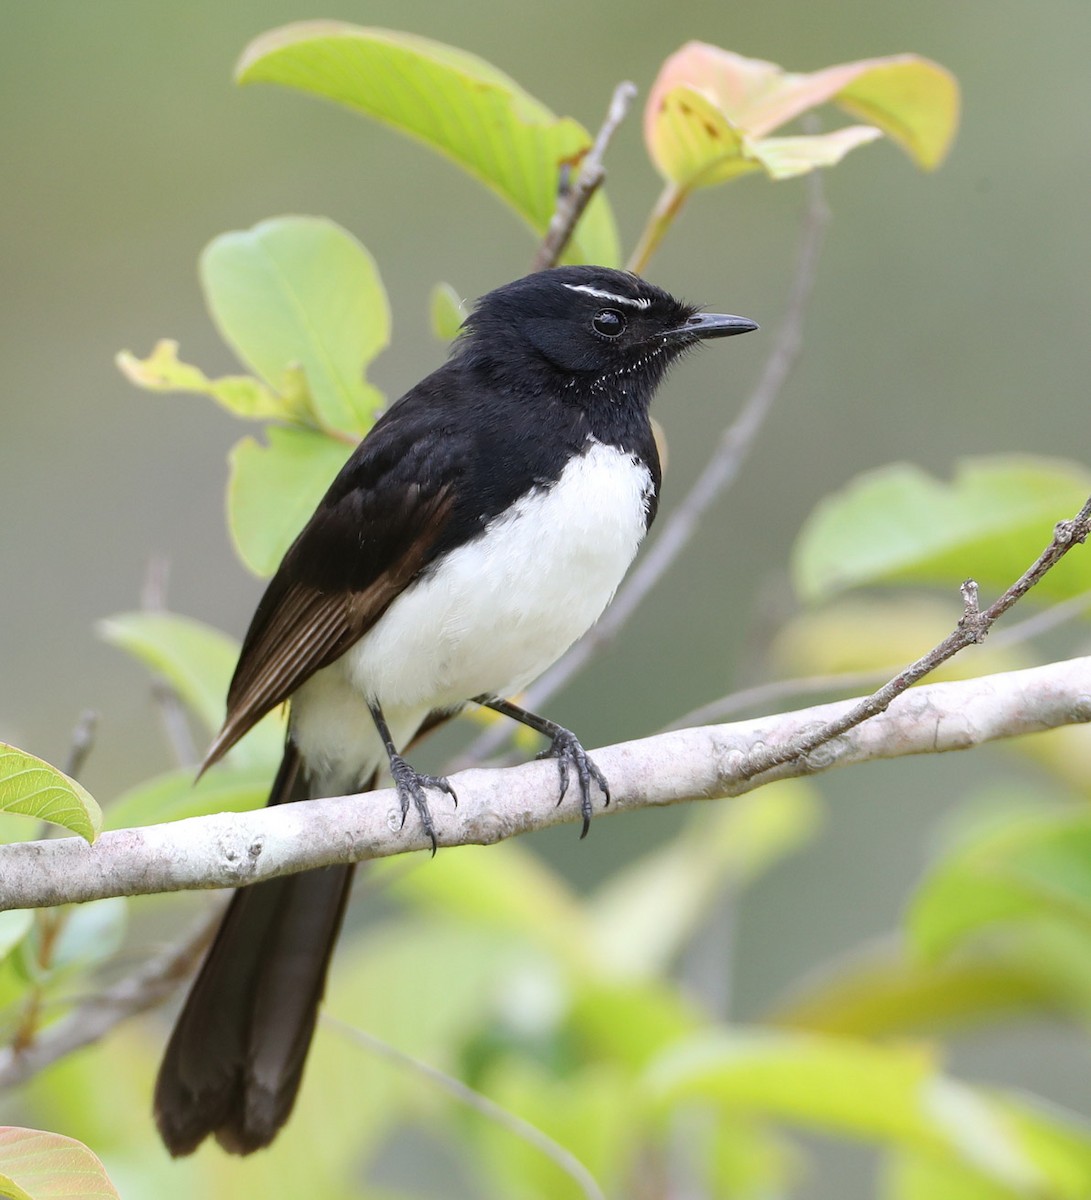 Willie-wagtail - Hal and Kirsten Snyder